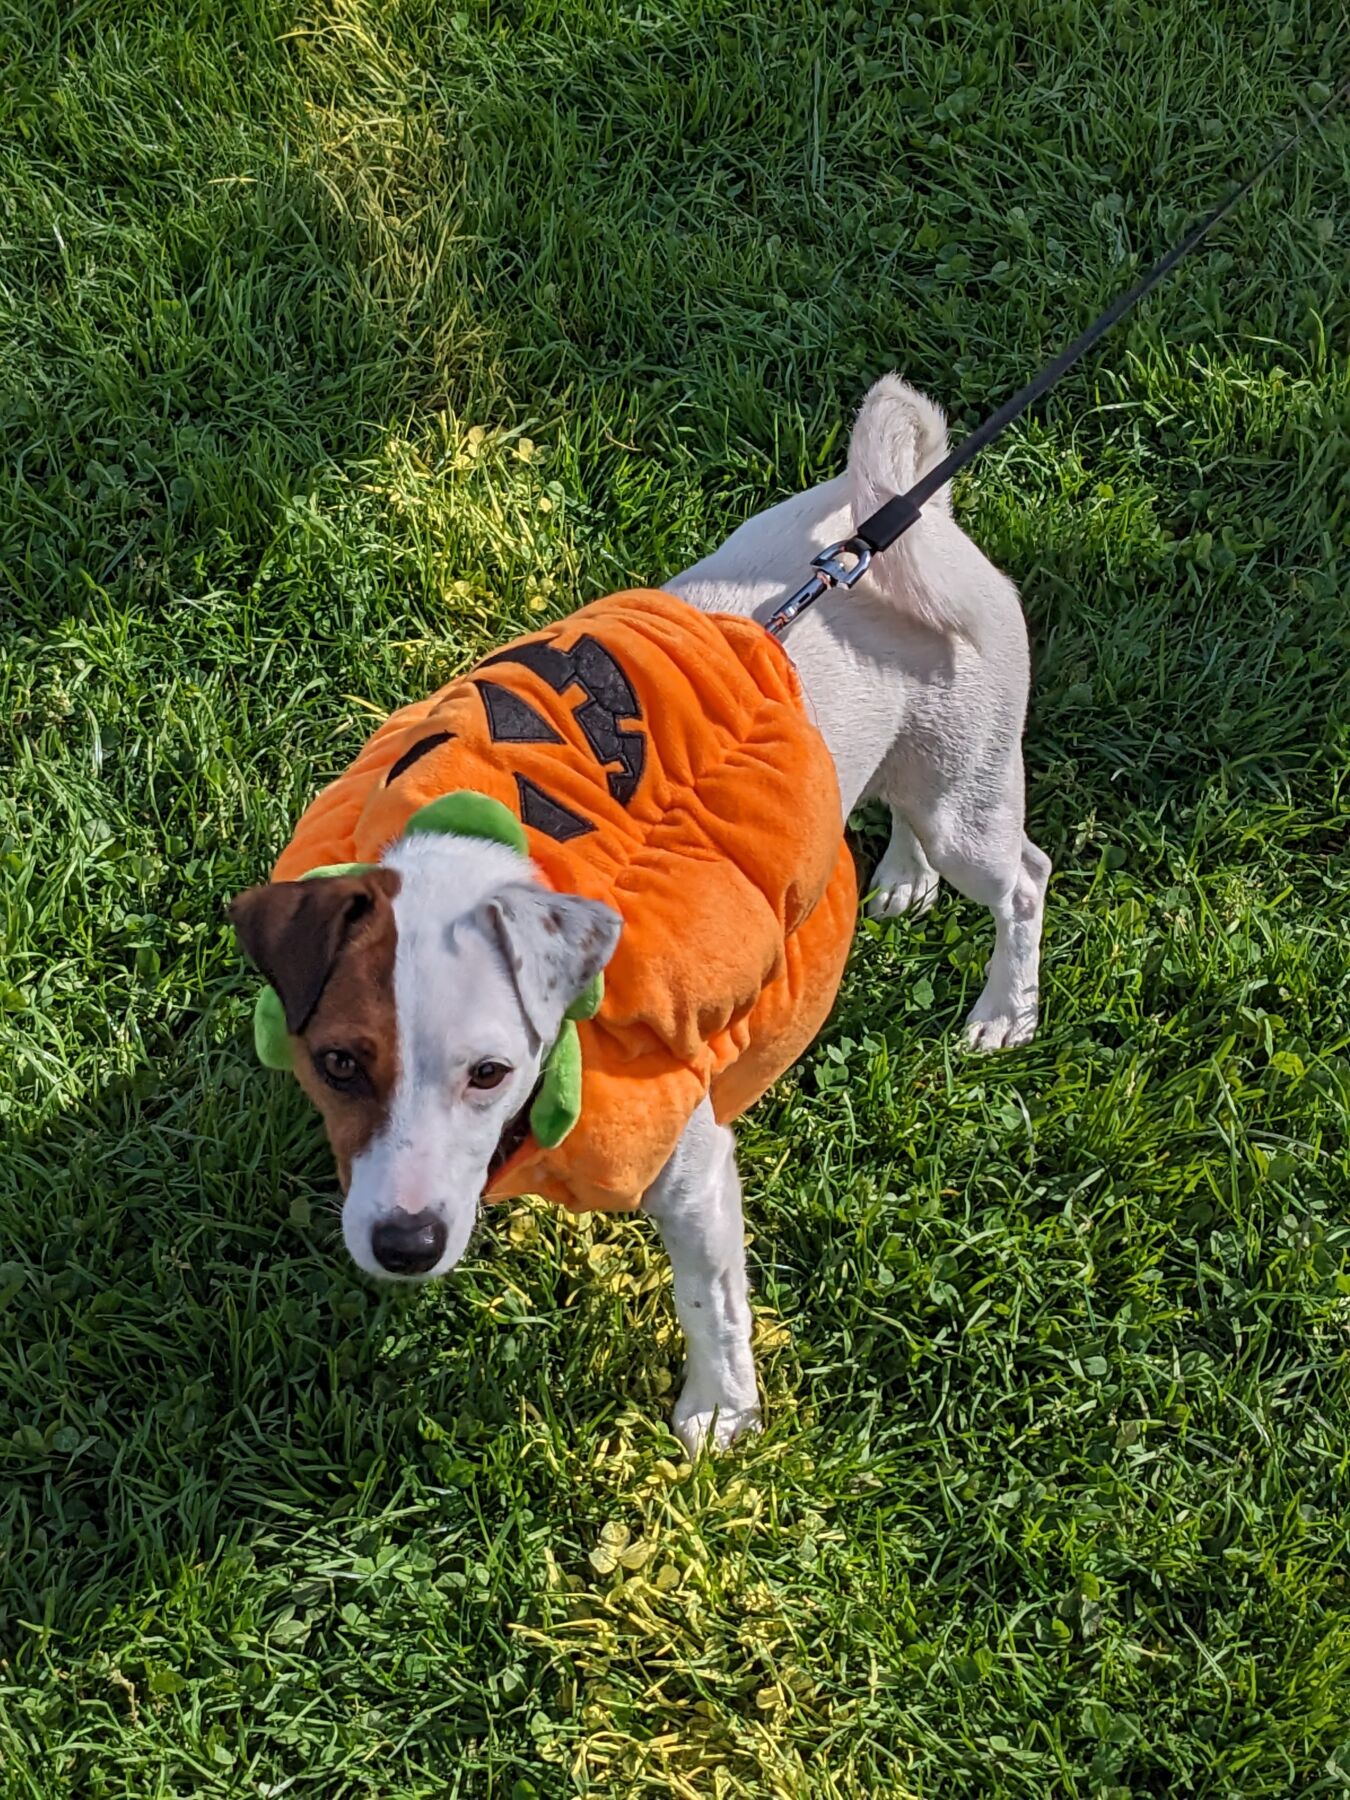 A small Jack Russell Terrier dog stands in the grass looking content. The dog has white fur with a brown spot over its eye, and is wearing a jack-o-lantern costume.